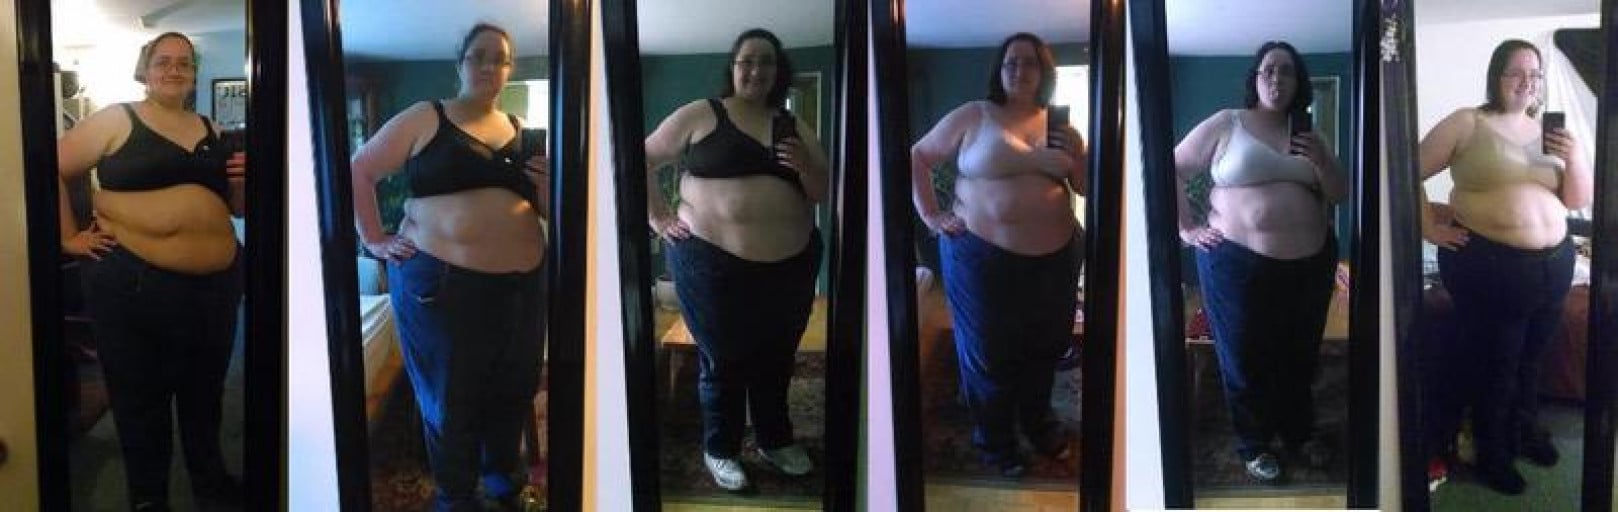 A progress pic of a 5'6" woman showing a fat loss from 371 pounds to 329 pounds. A total loss of 42 pounds.